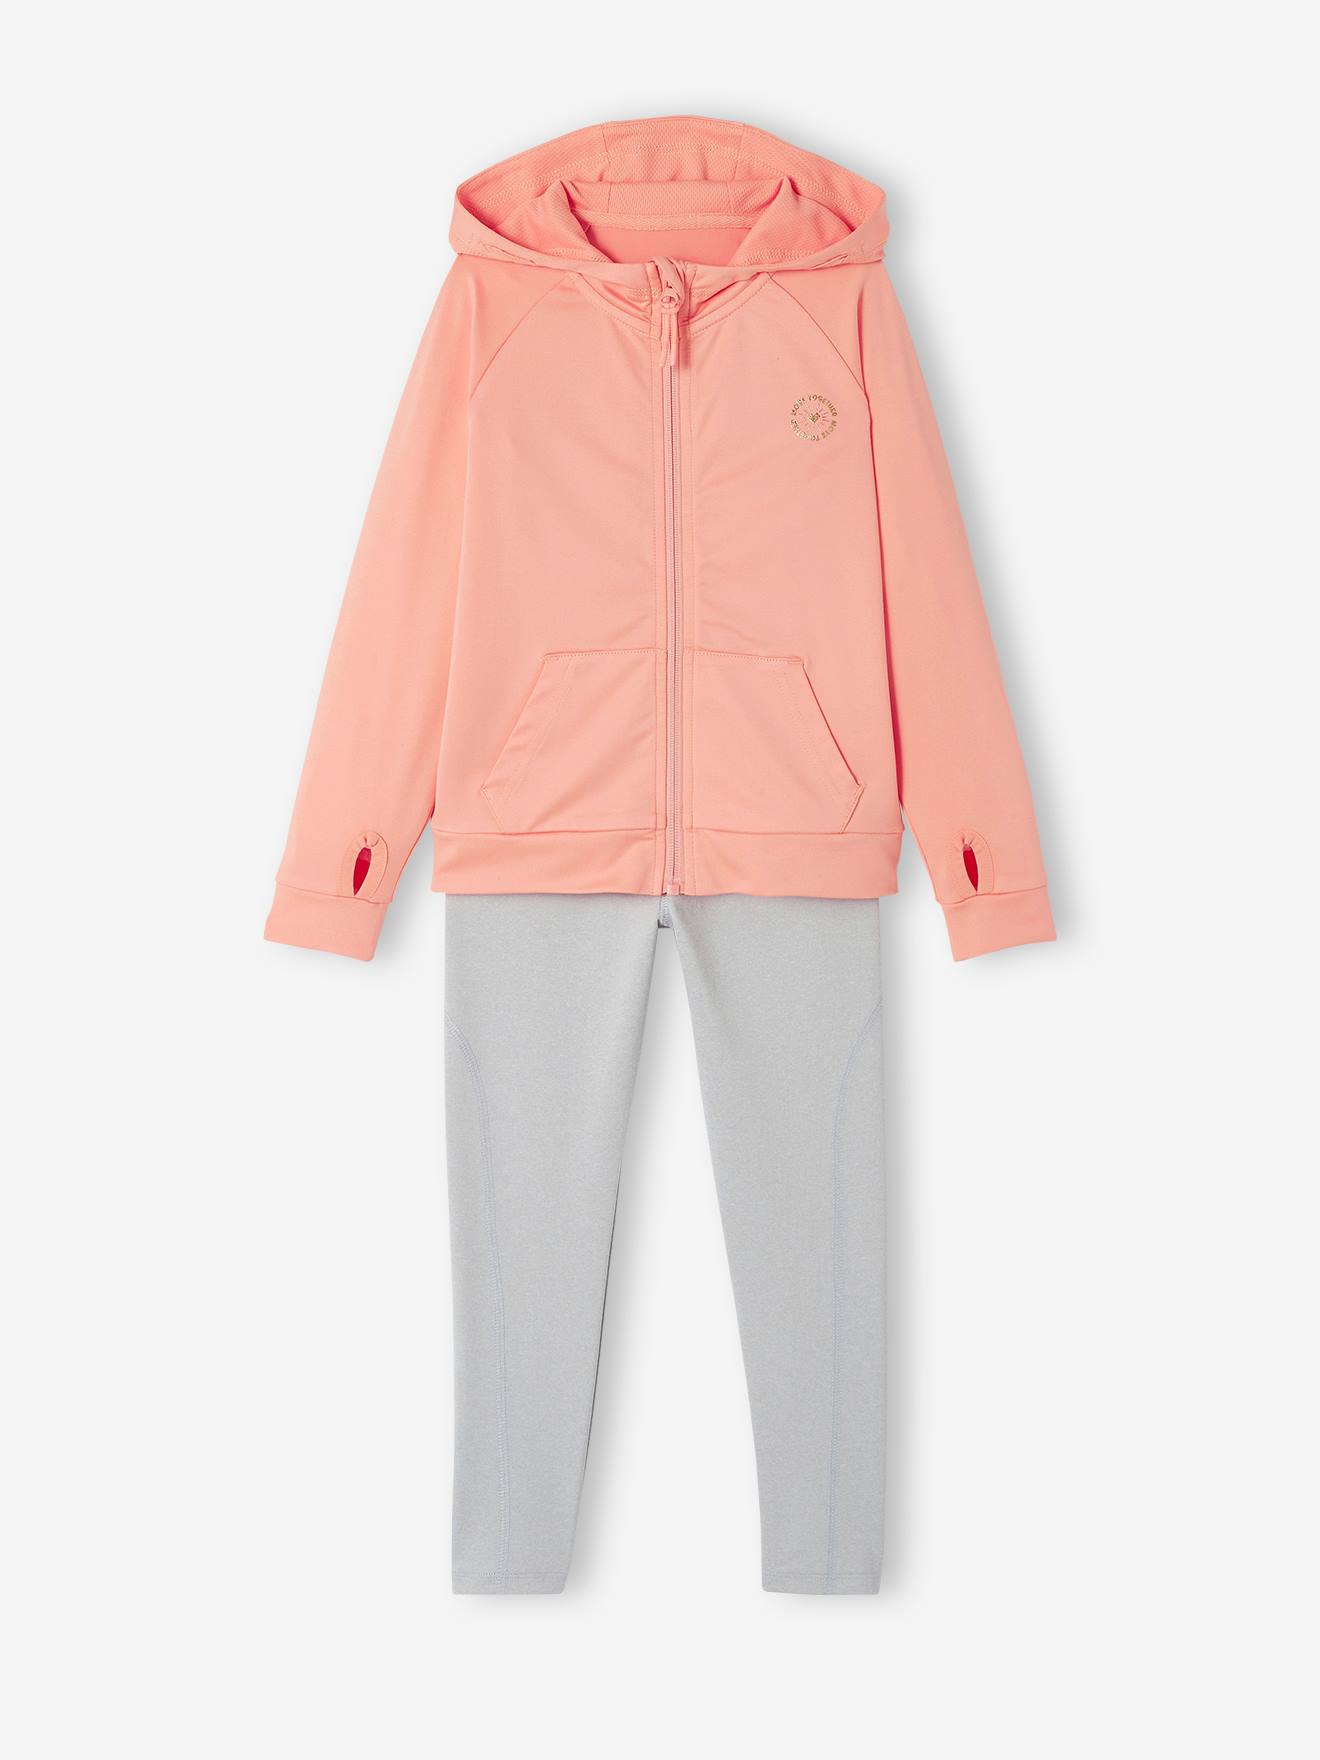 Sports Combo, Zipped Jacket & Leggings in Techno Fabric, for Girls peach